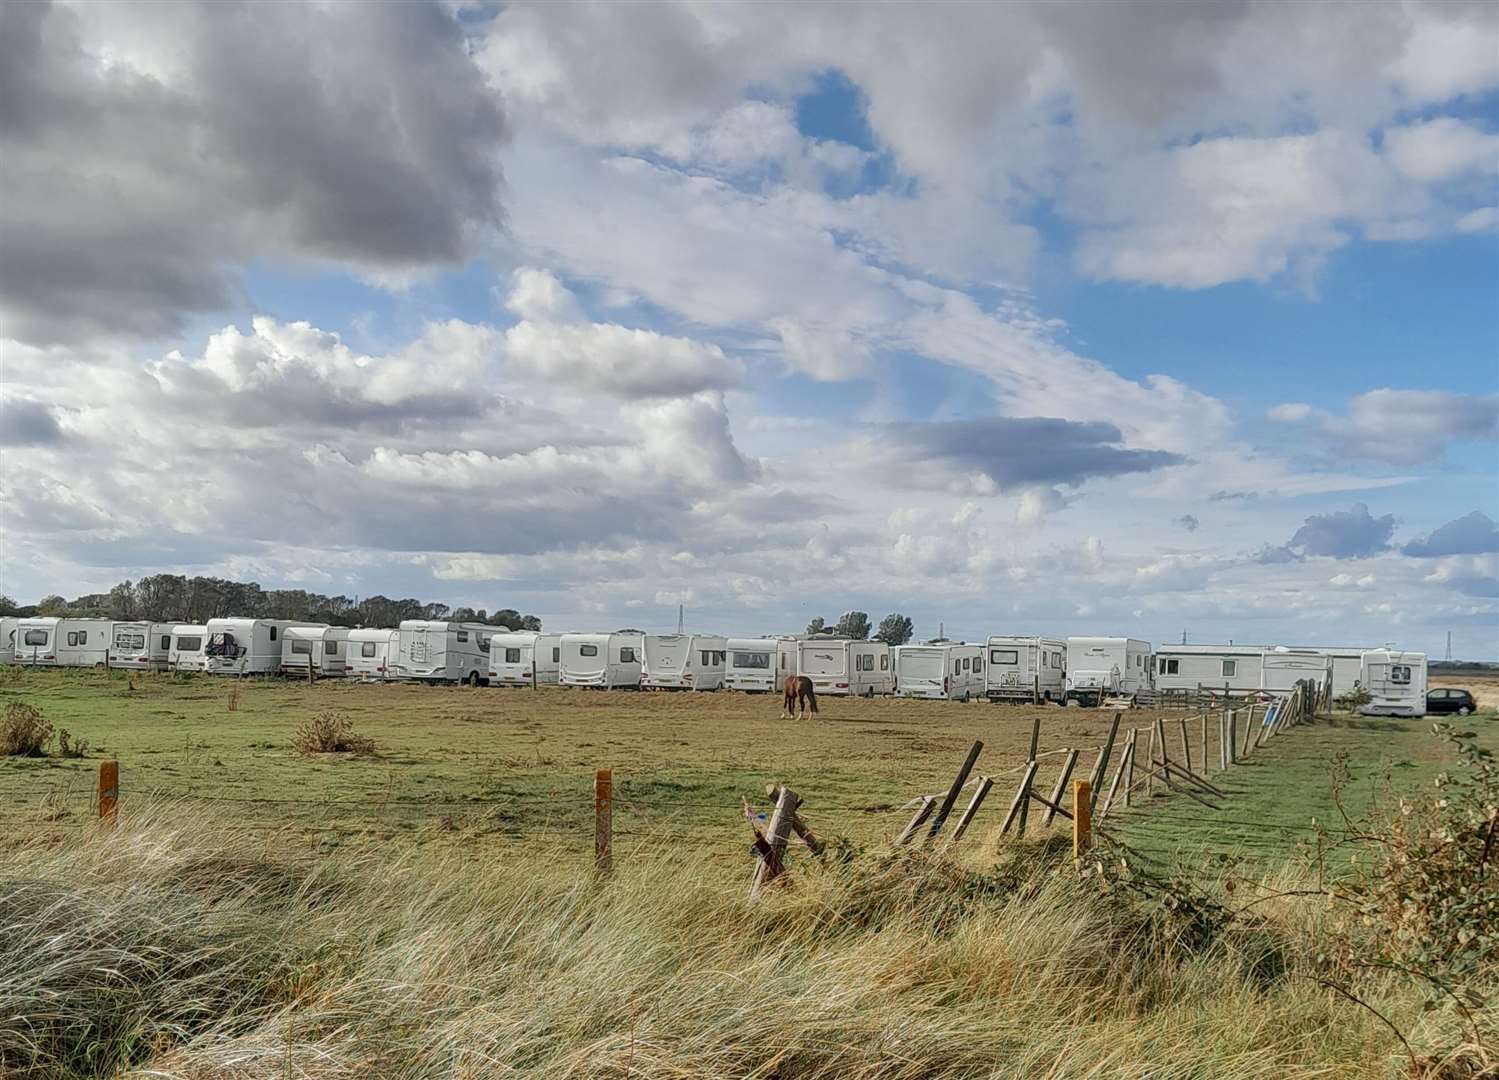 Ronald Carpenter, of Whitehall Farm, Lydd was fined £5,000 for storing mobile homes on his land without relevant legal permissions to do so. Picture: FHDC